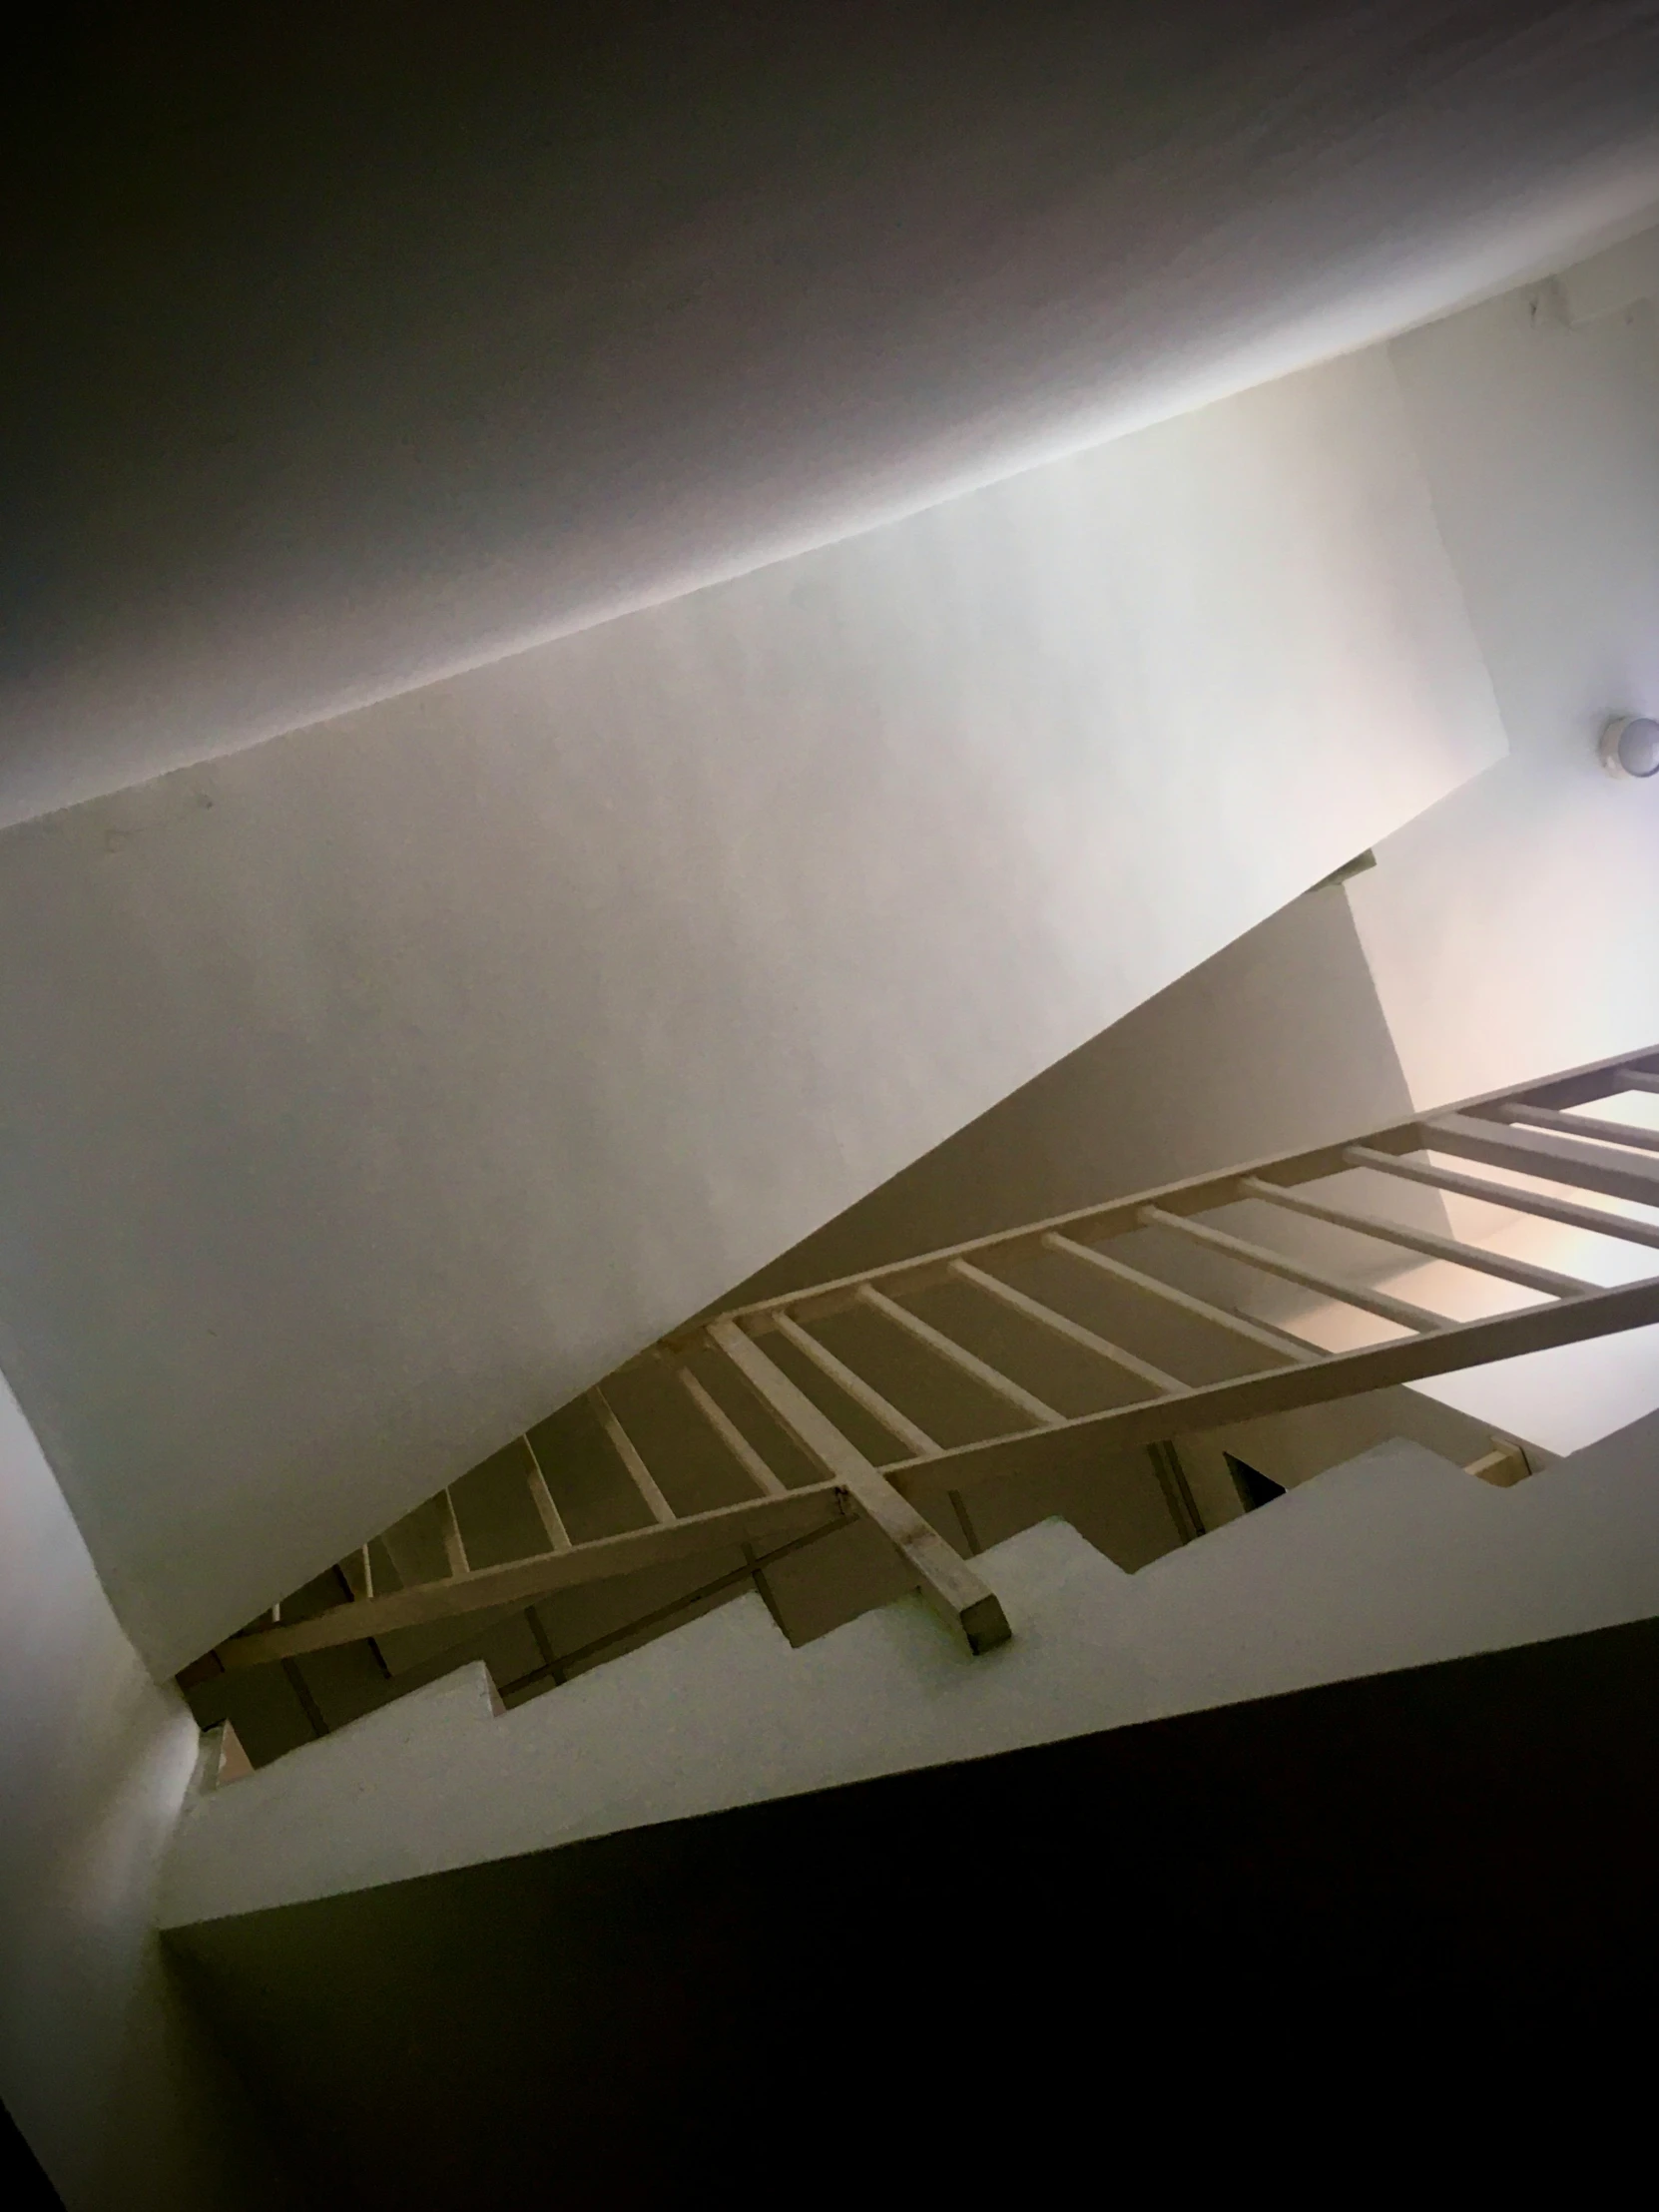 there is a large metal stair railing above a bed